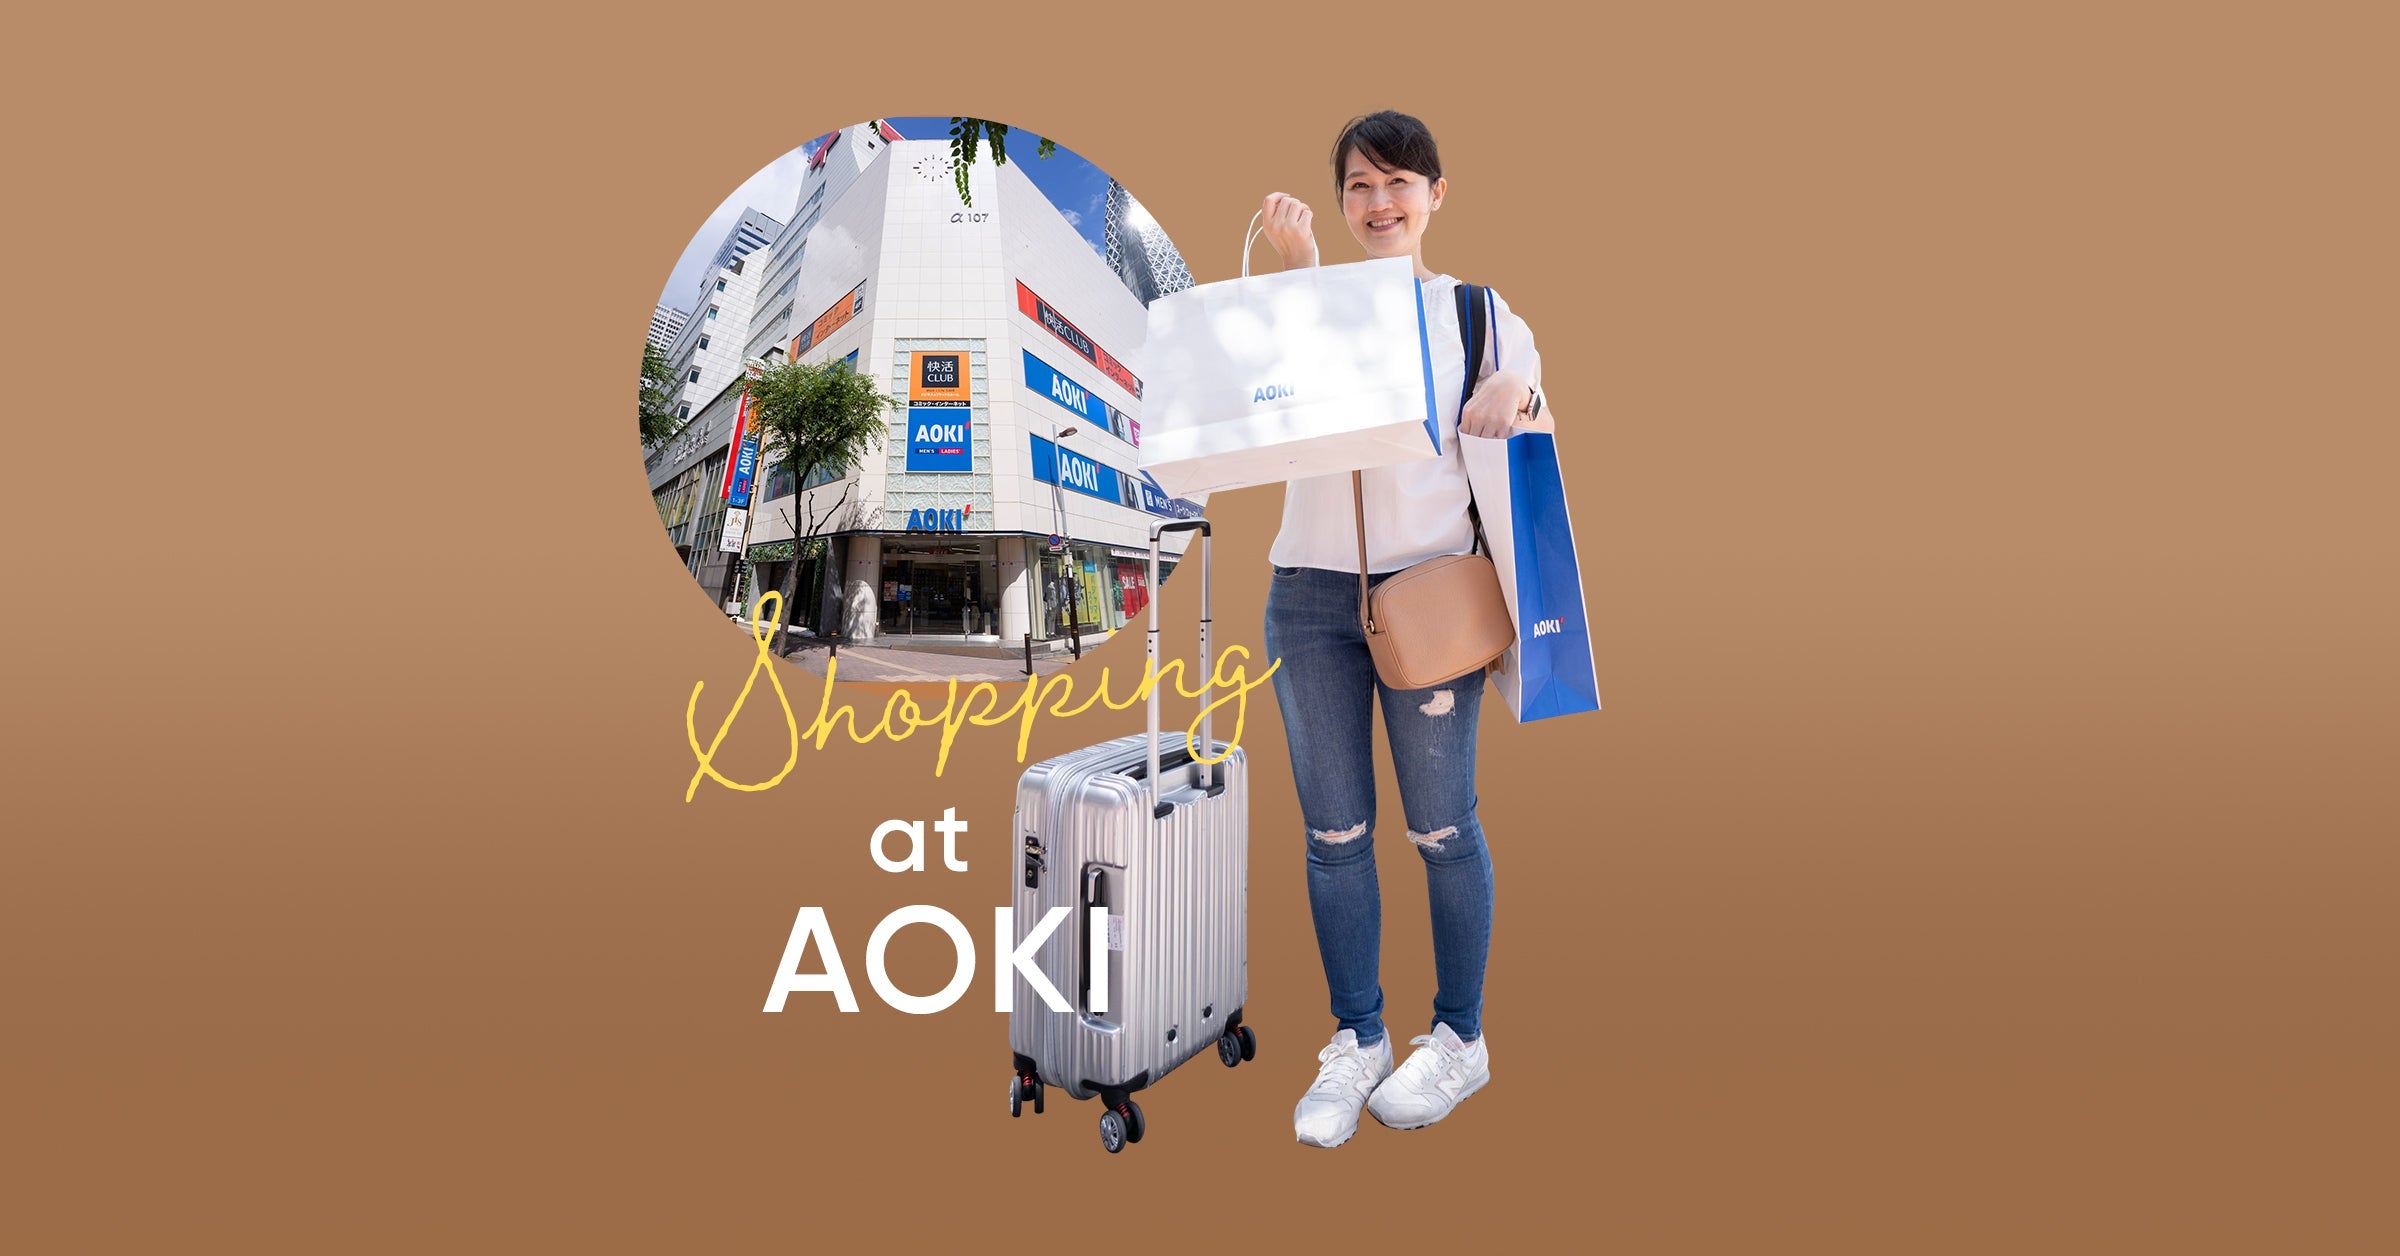 Shinjuku shopping must-visit! Get your Japanese style office outfits in AOKI!